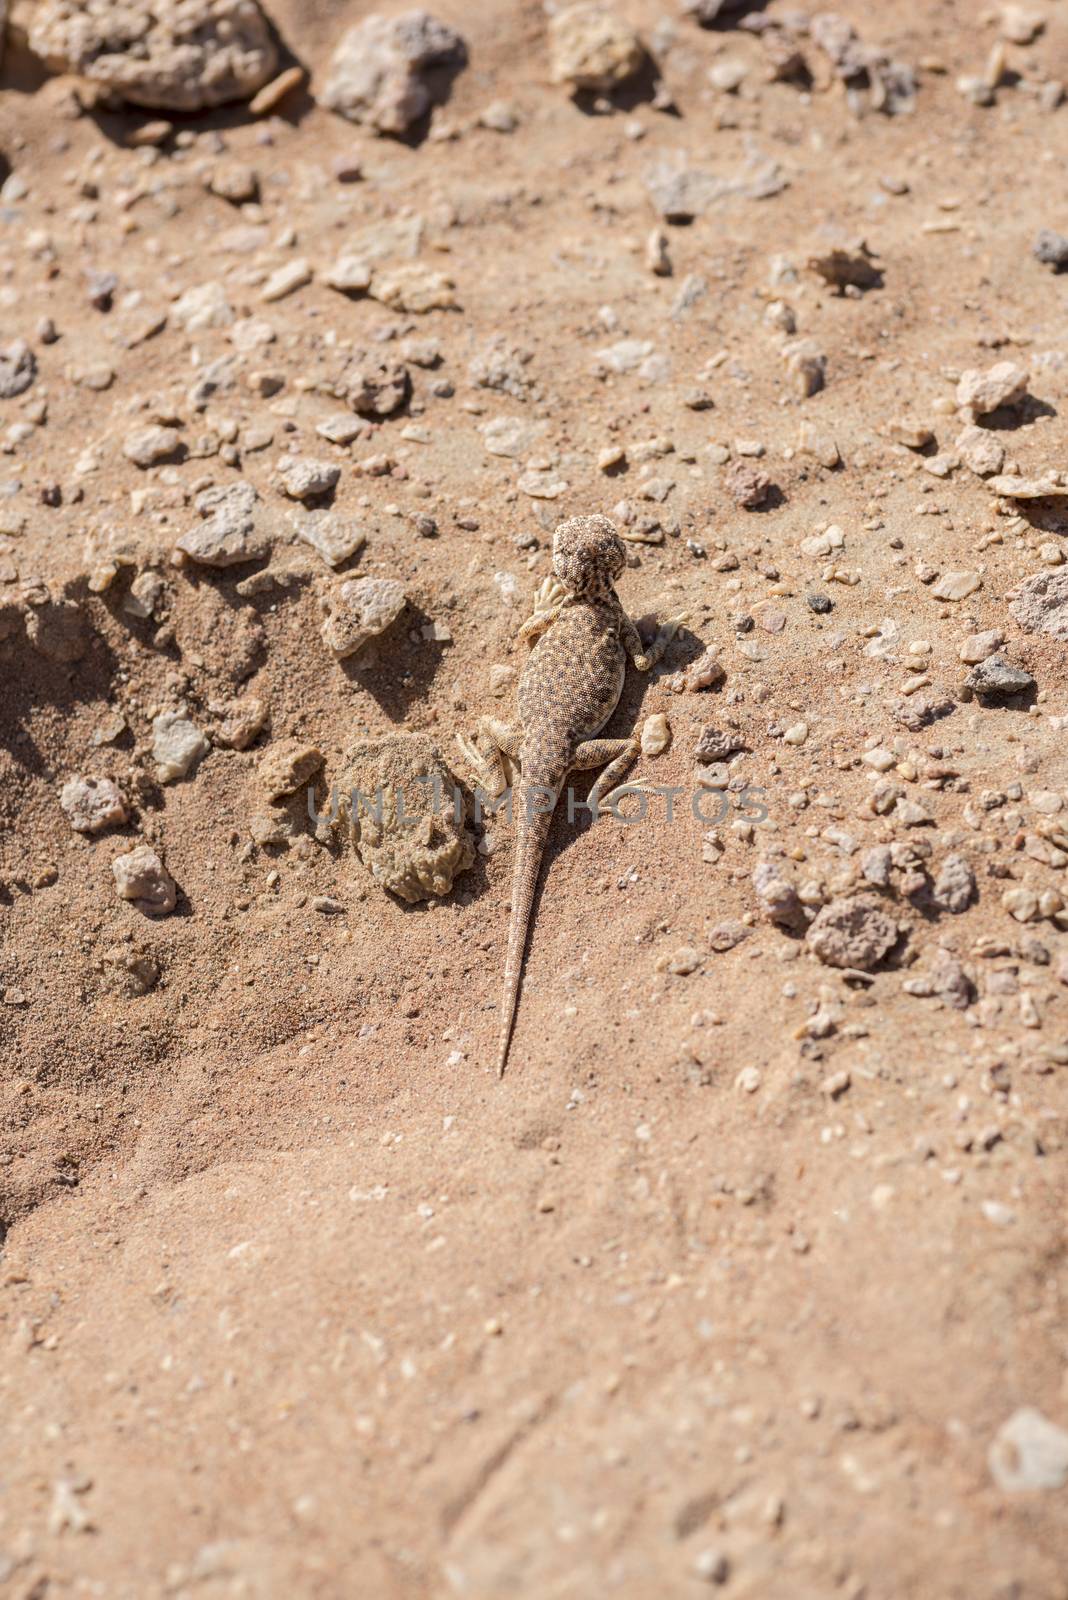 Close-up and top view of Arabian toad-headed agama (Phrynocephalus arabicus) in the Desert, surronded by sand and few small stones, Sharjah, UAE